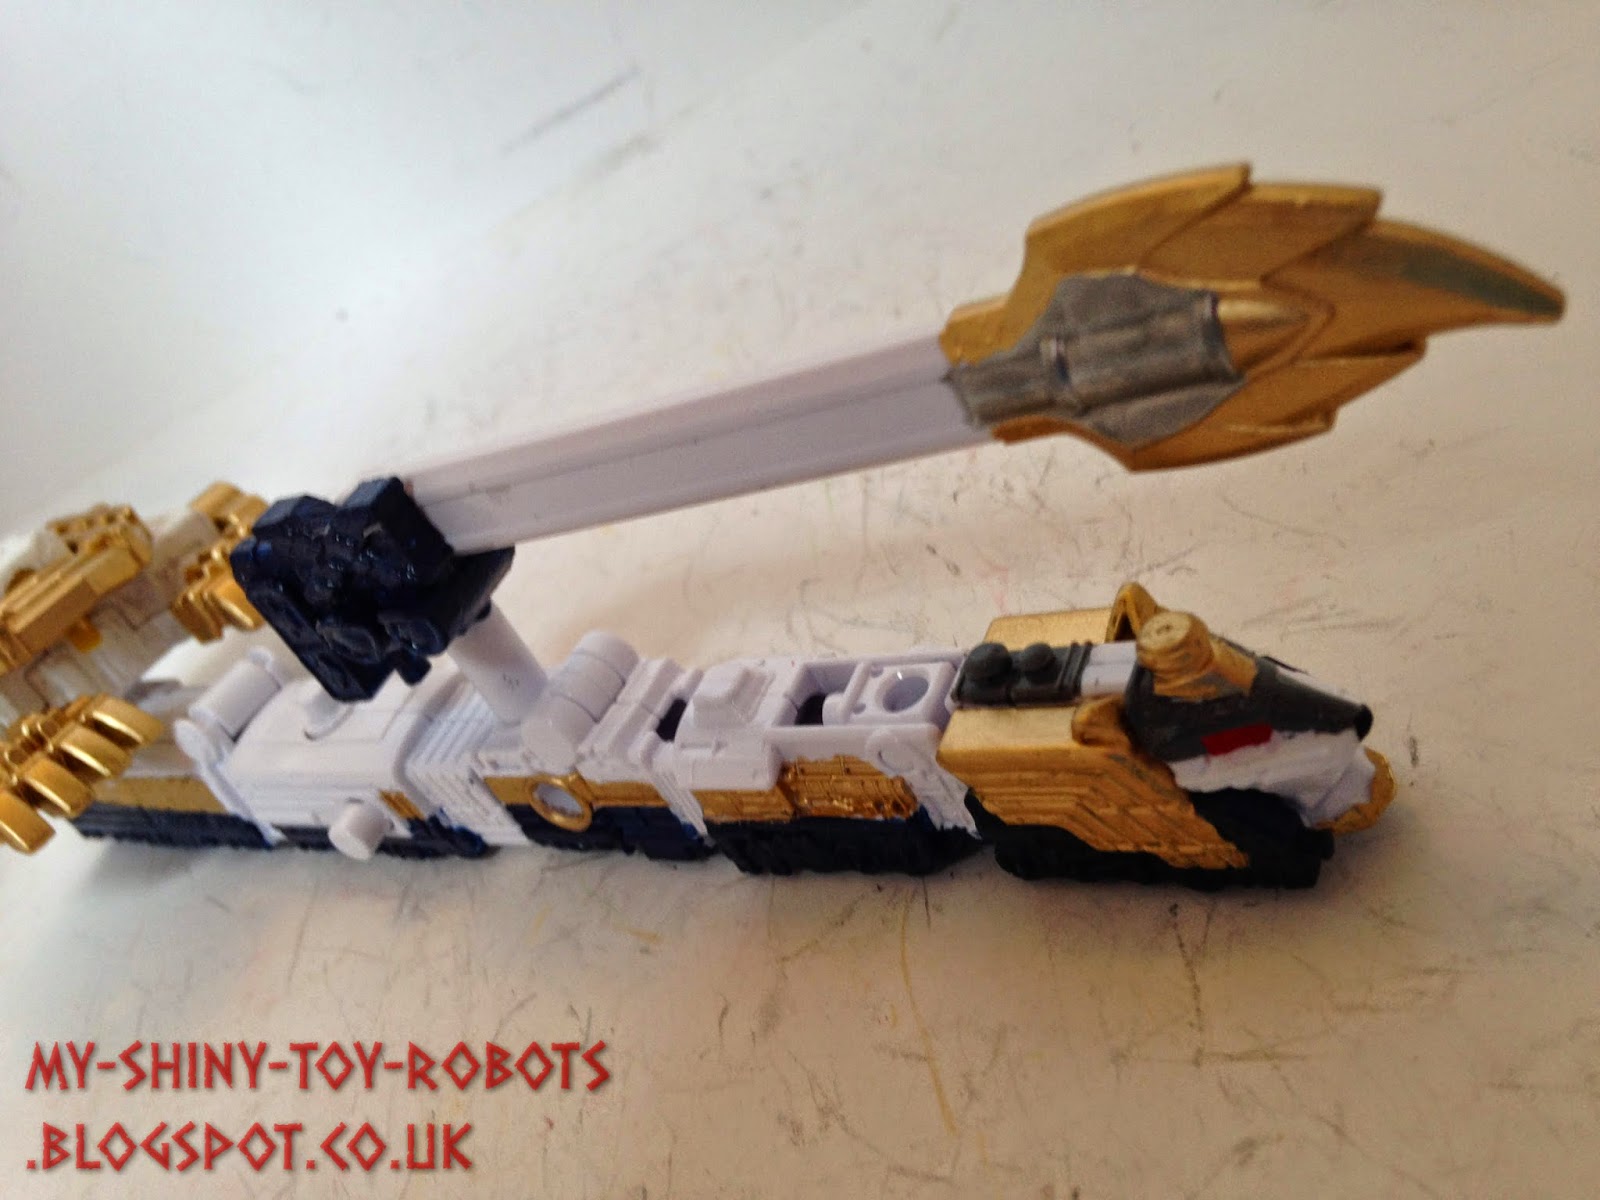 The tail/sword connected to the Lion Ressha